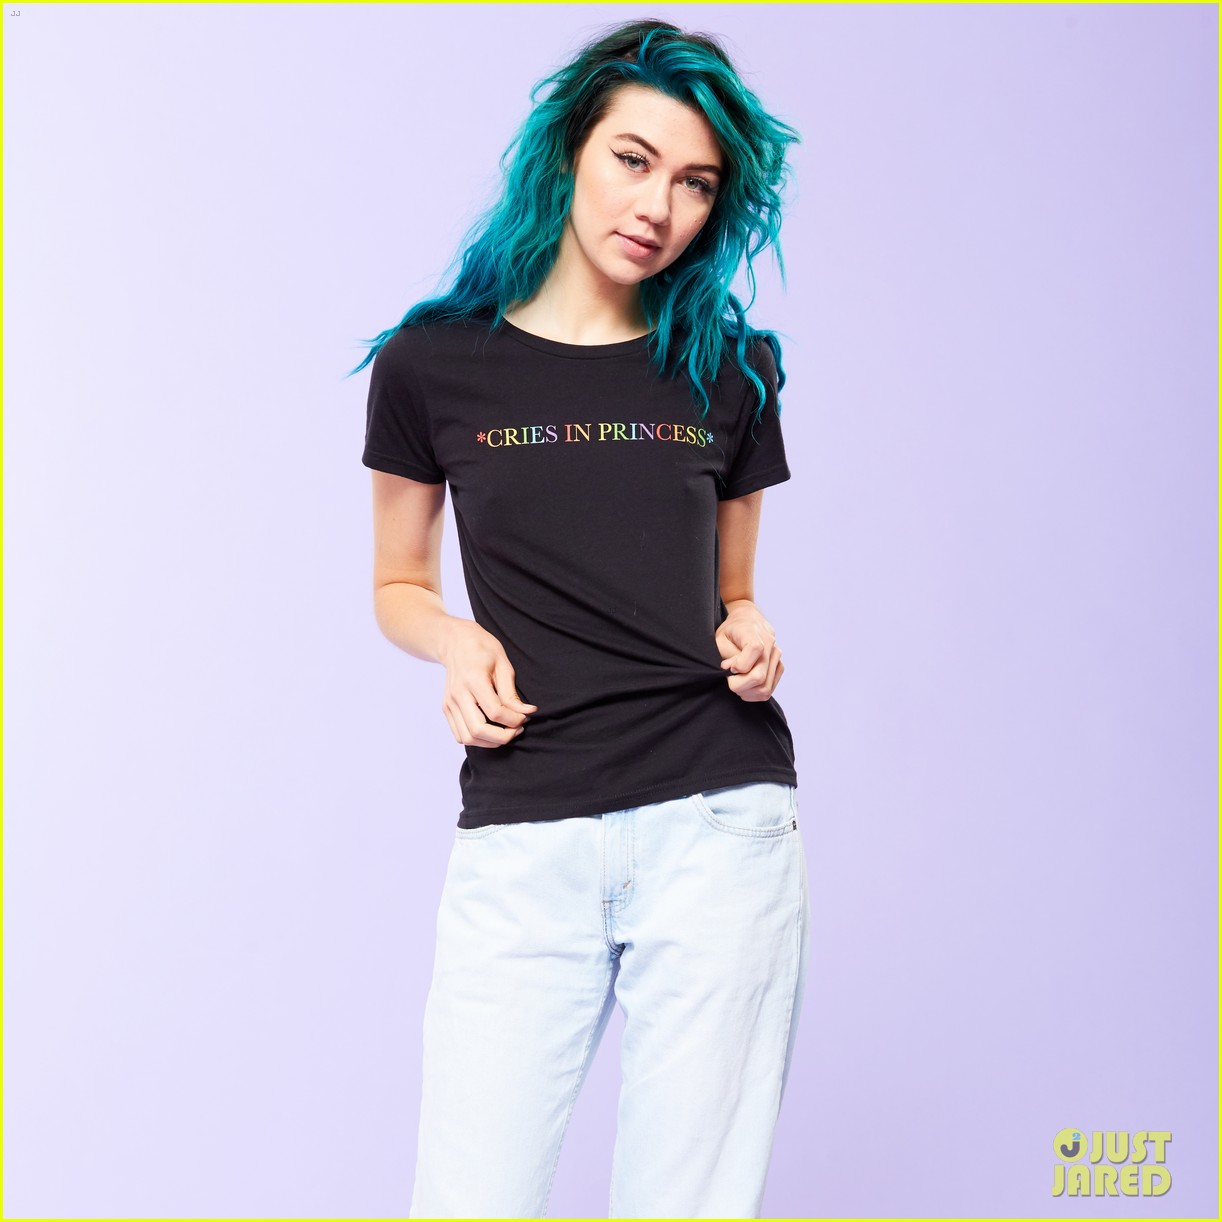 jessie paege has her own hot topic web store dream come true 02